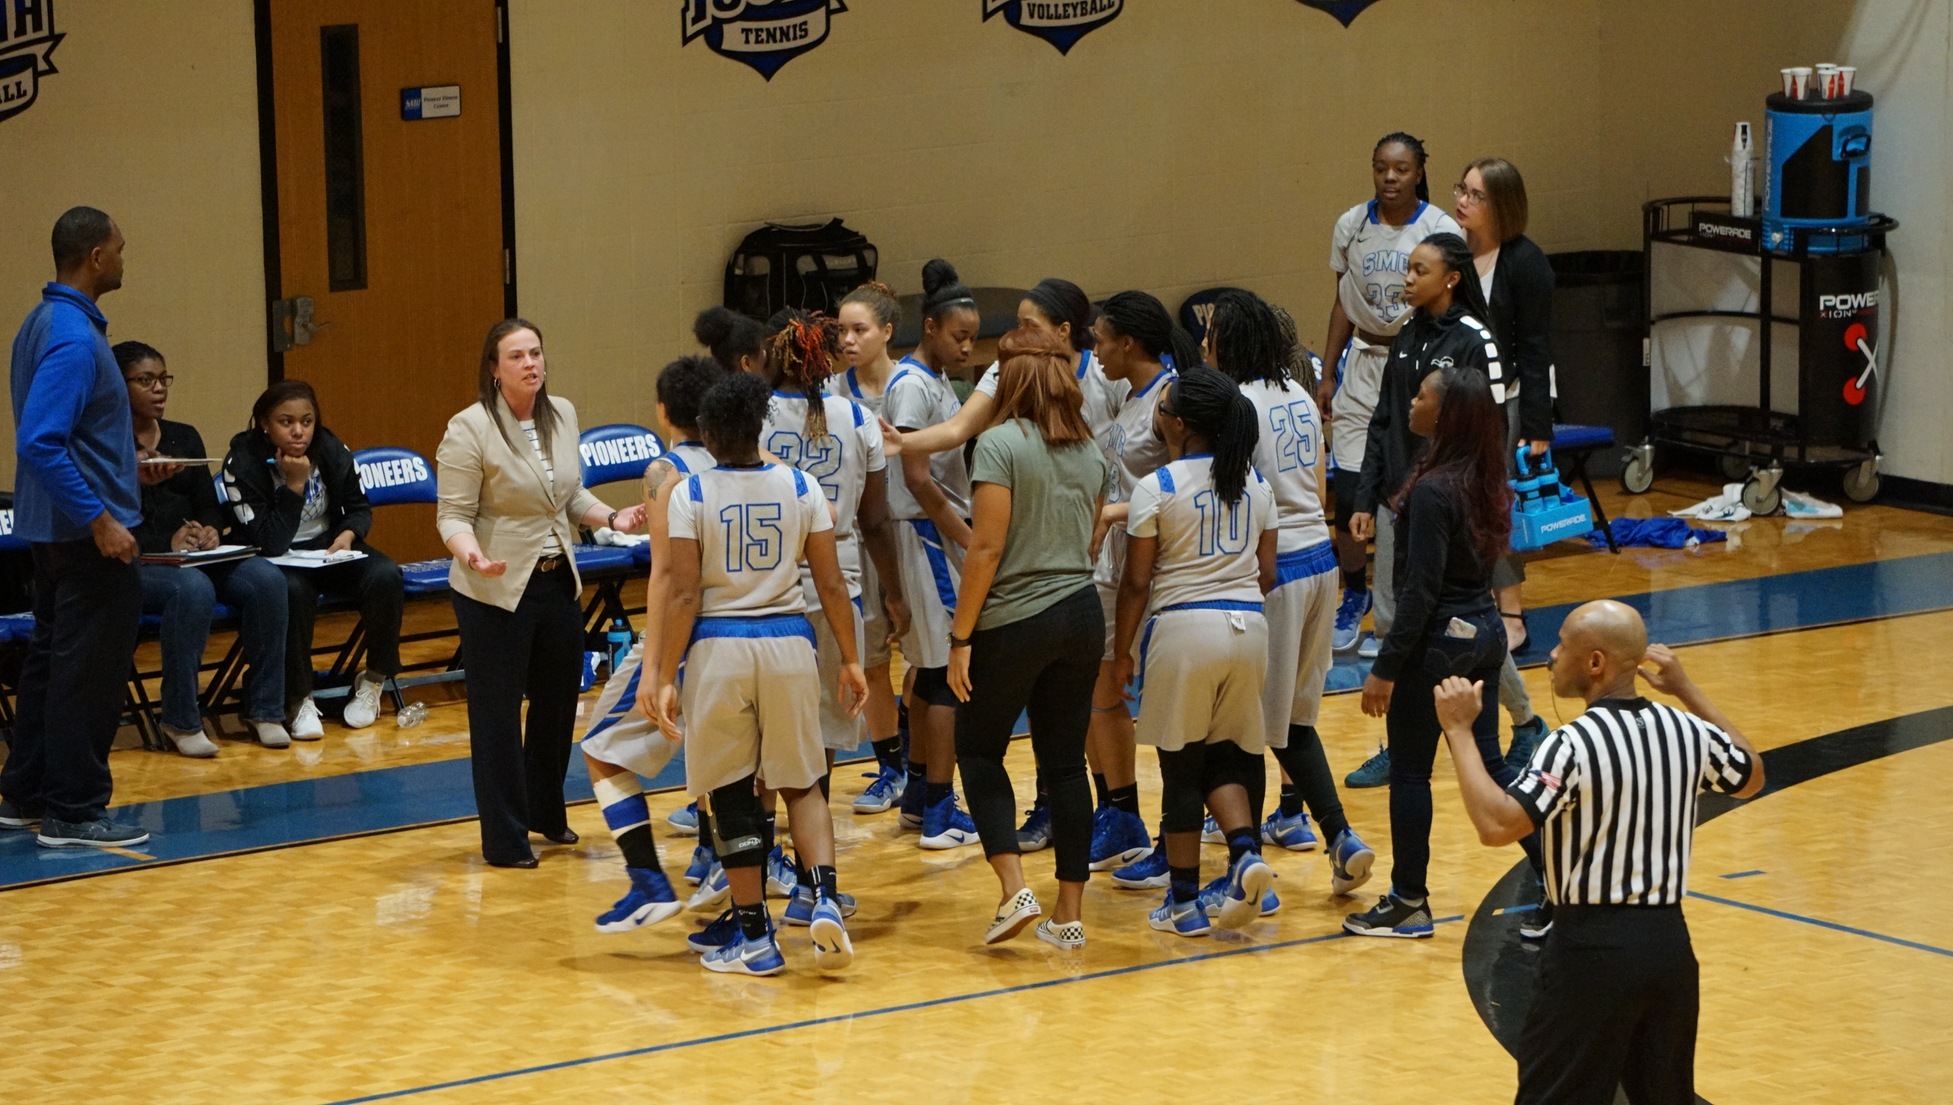 Women's Basketball Team Wins First Game of 2017 vs. Chattanooga State Community College